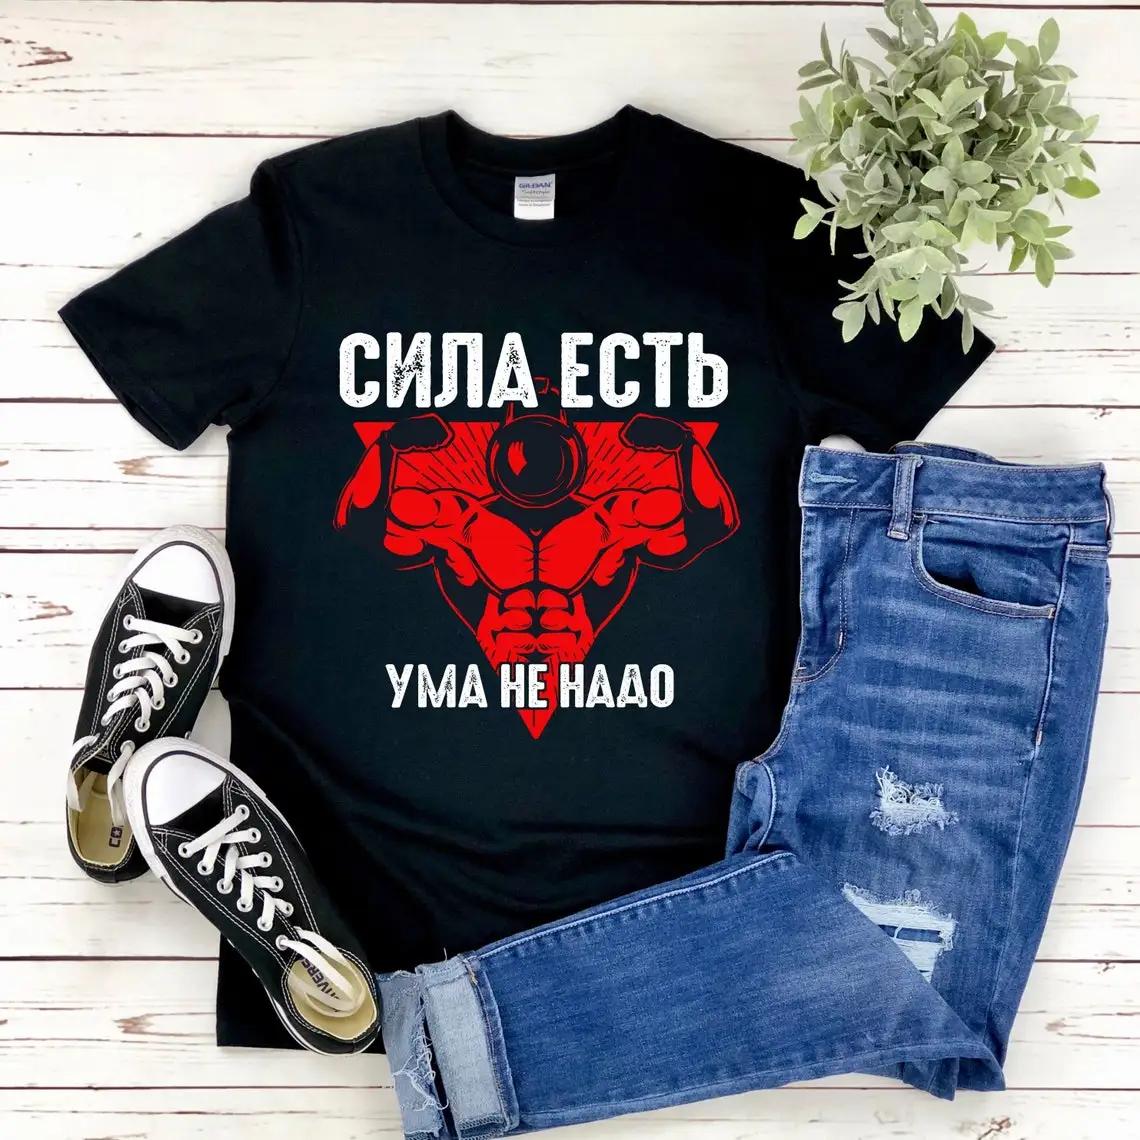 Funny Russian Gym Fitness Cyrillic Letters Slogan T-Shirt New 100% Cotton Short Sleeve O-Neck Summer Casual Mens T-s